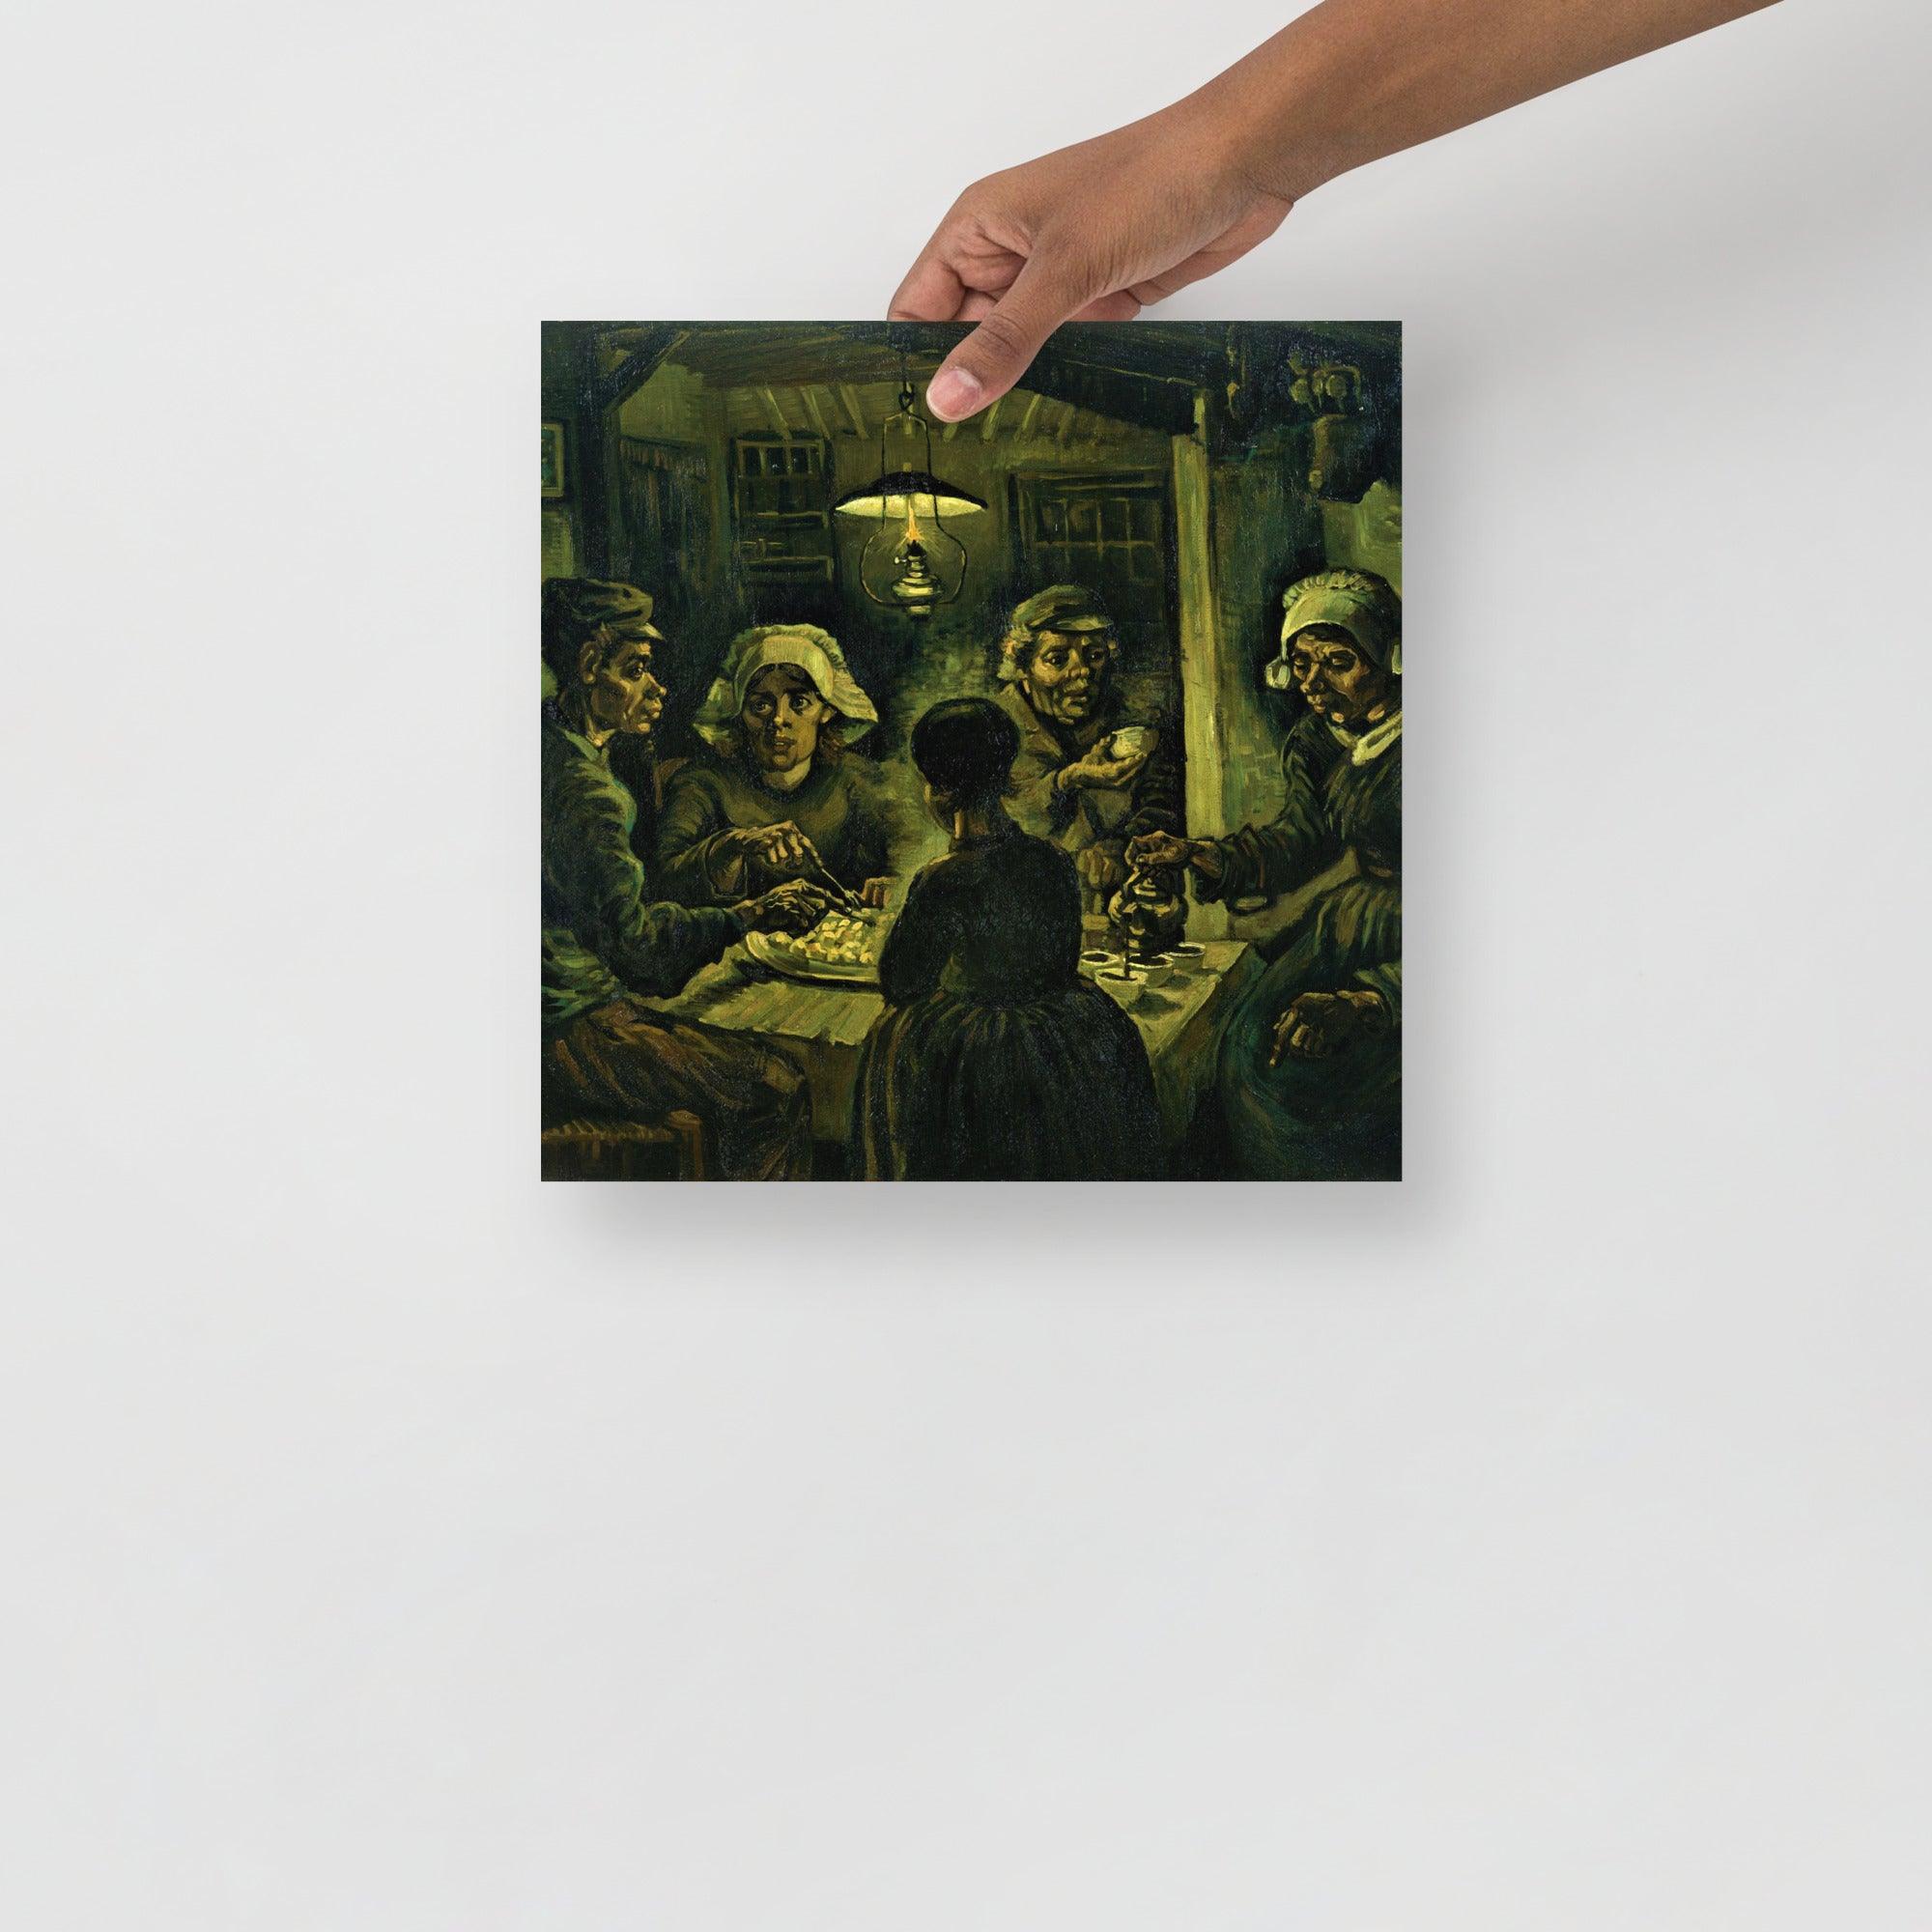 The Potato Eaters by Vincent van Gogh poster on a plain backdrop in size 12x12”.